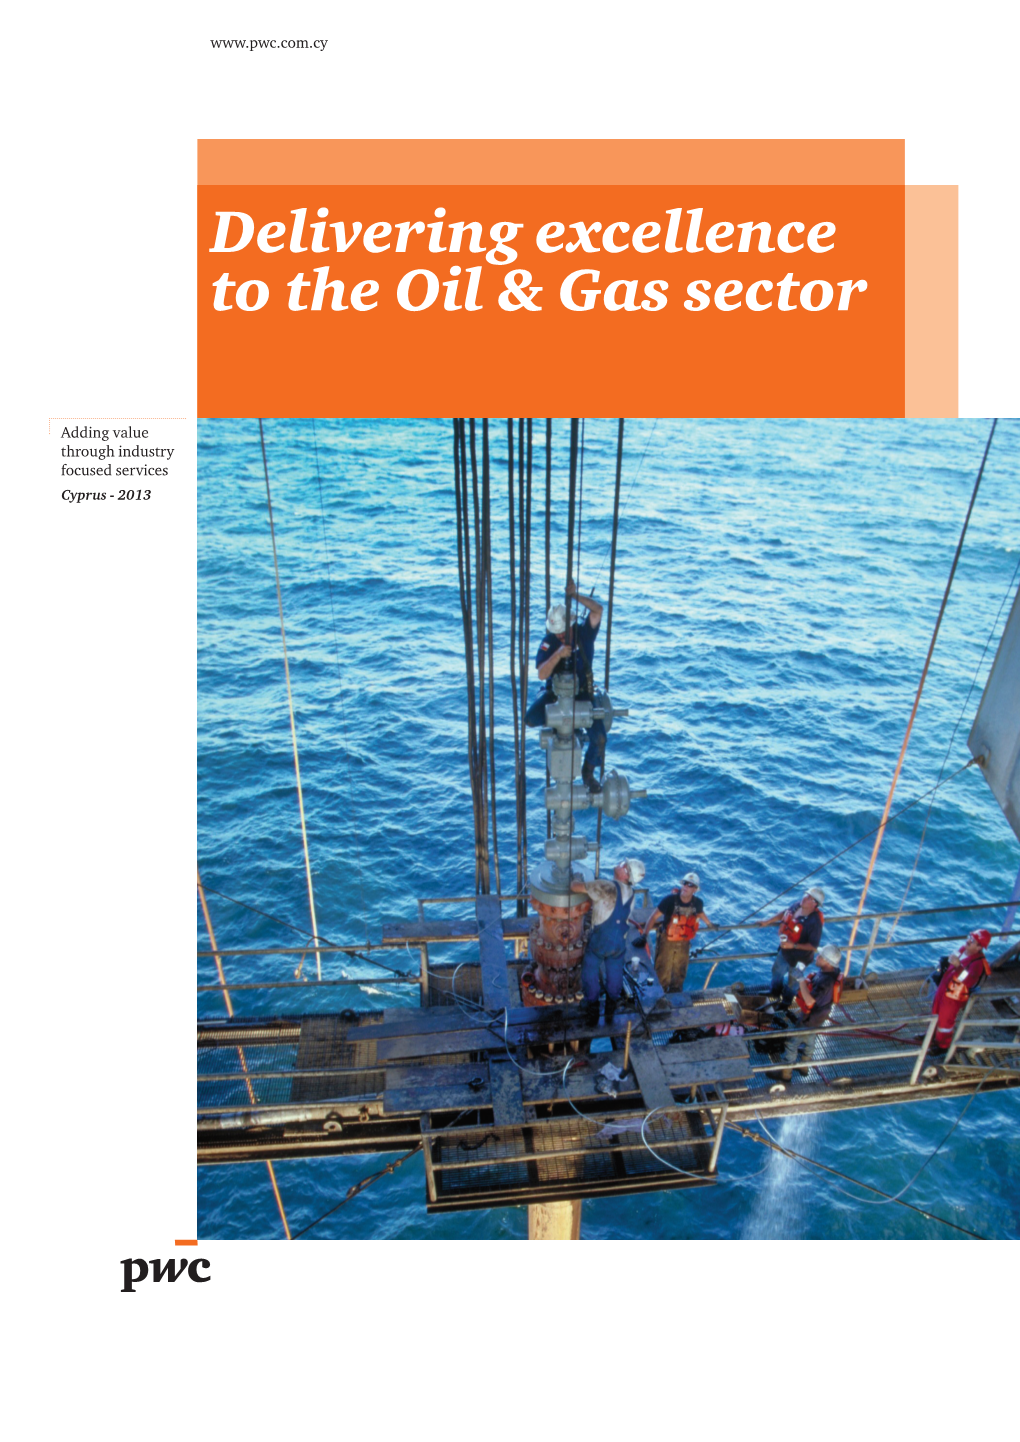 Delivering Excellence to the Oil & Gas Sector